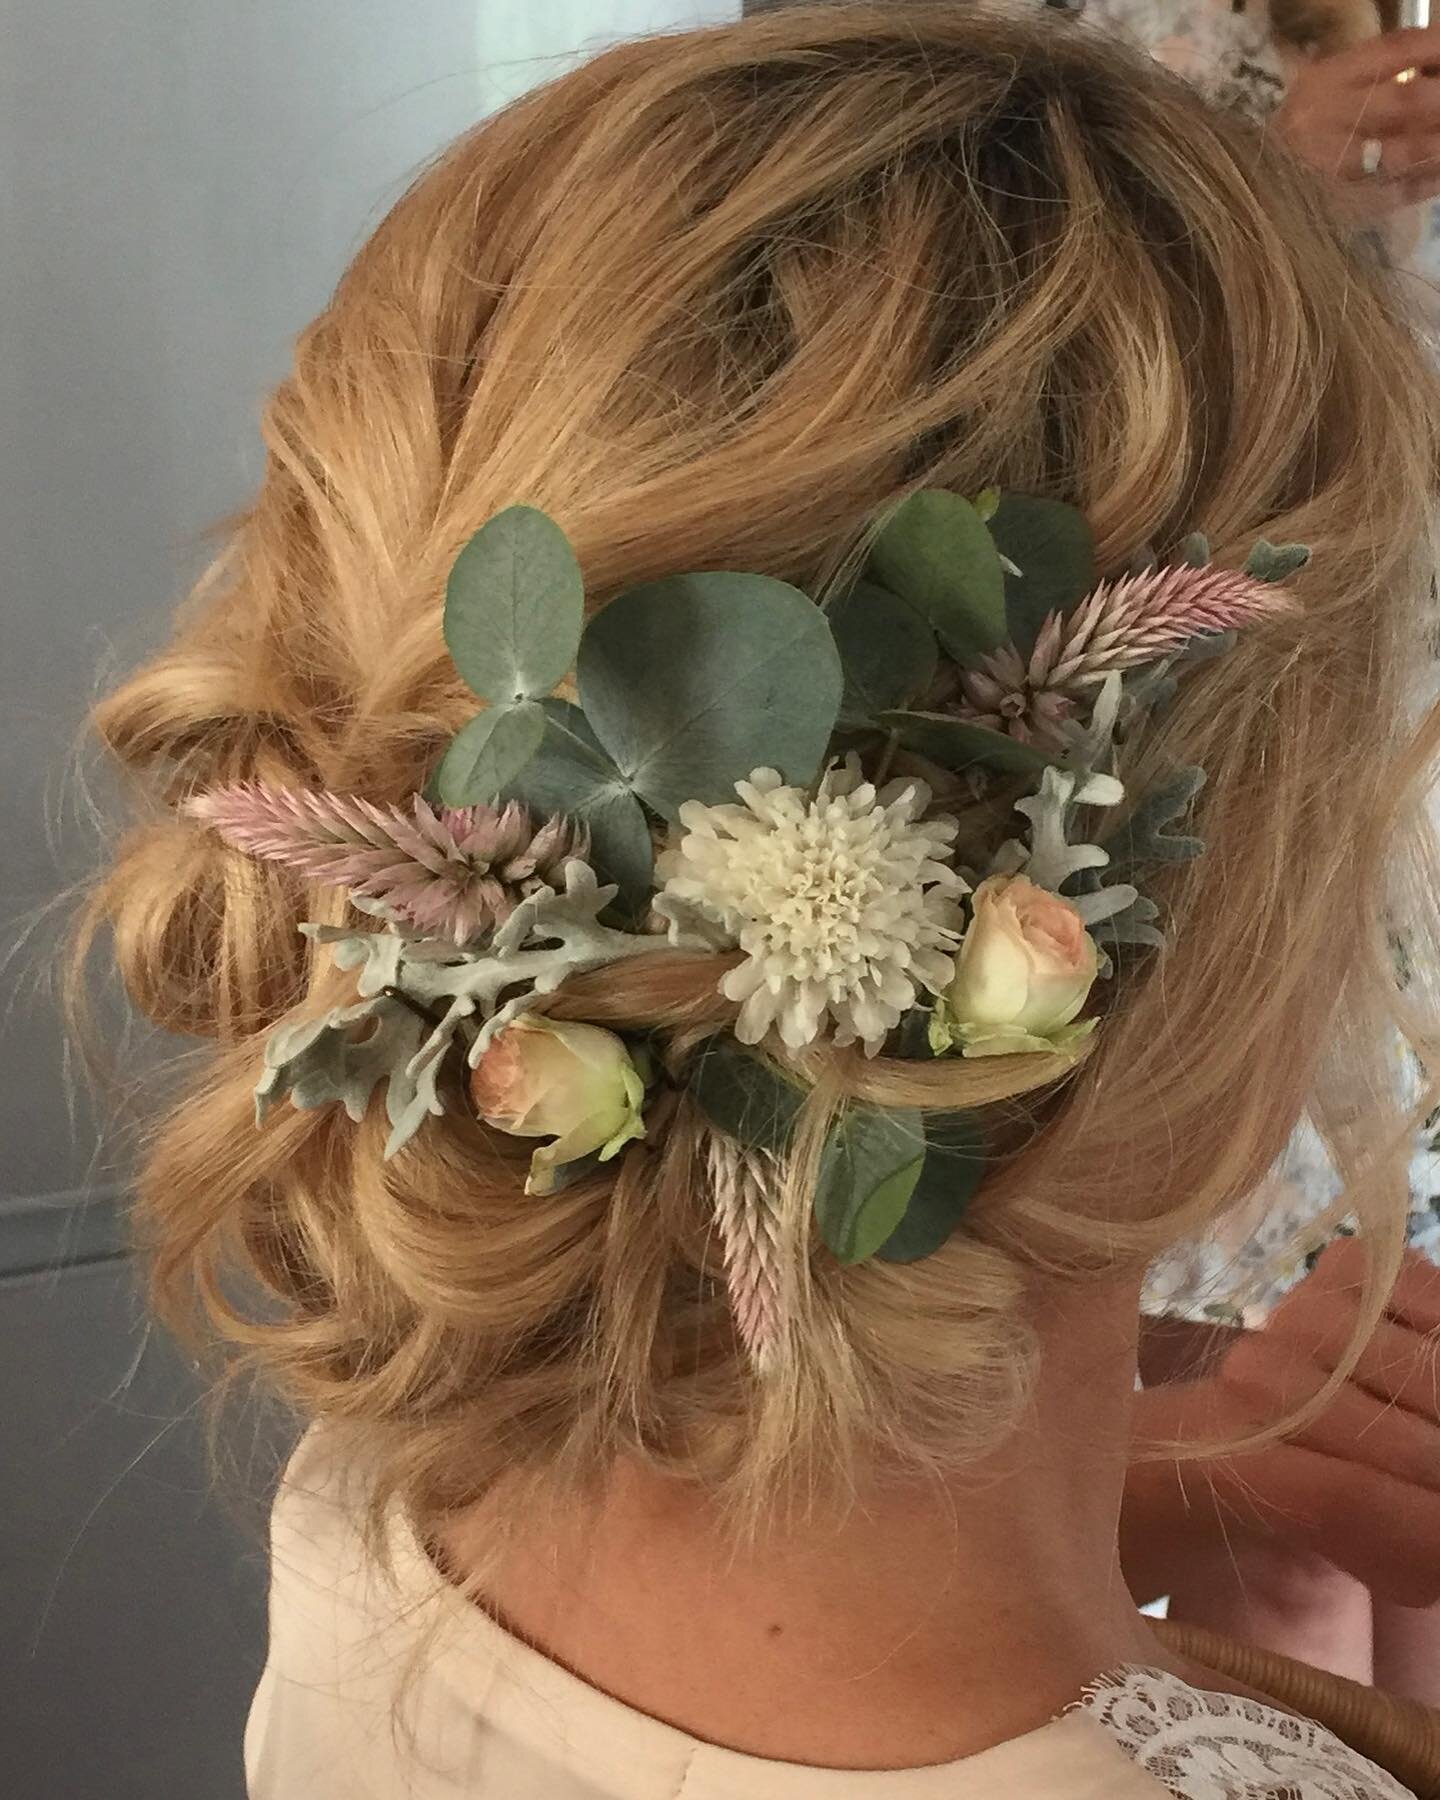 Bohemian hairstyle for a forest wedding 
#weddinghair #weddinghairstyle #cornwallwedding #cornwallweddingsuppliers #cornwallhairstylist #cornwallmakeupartist